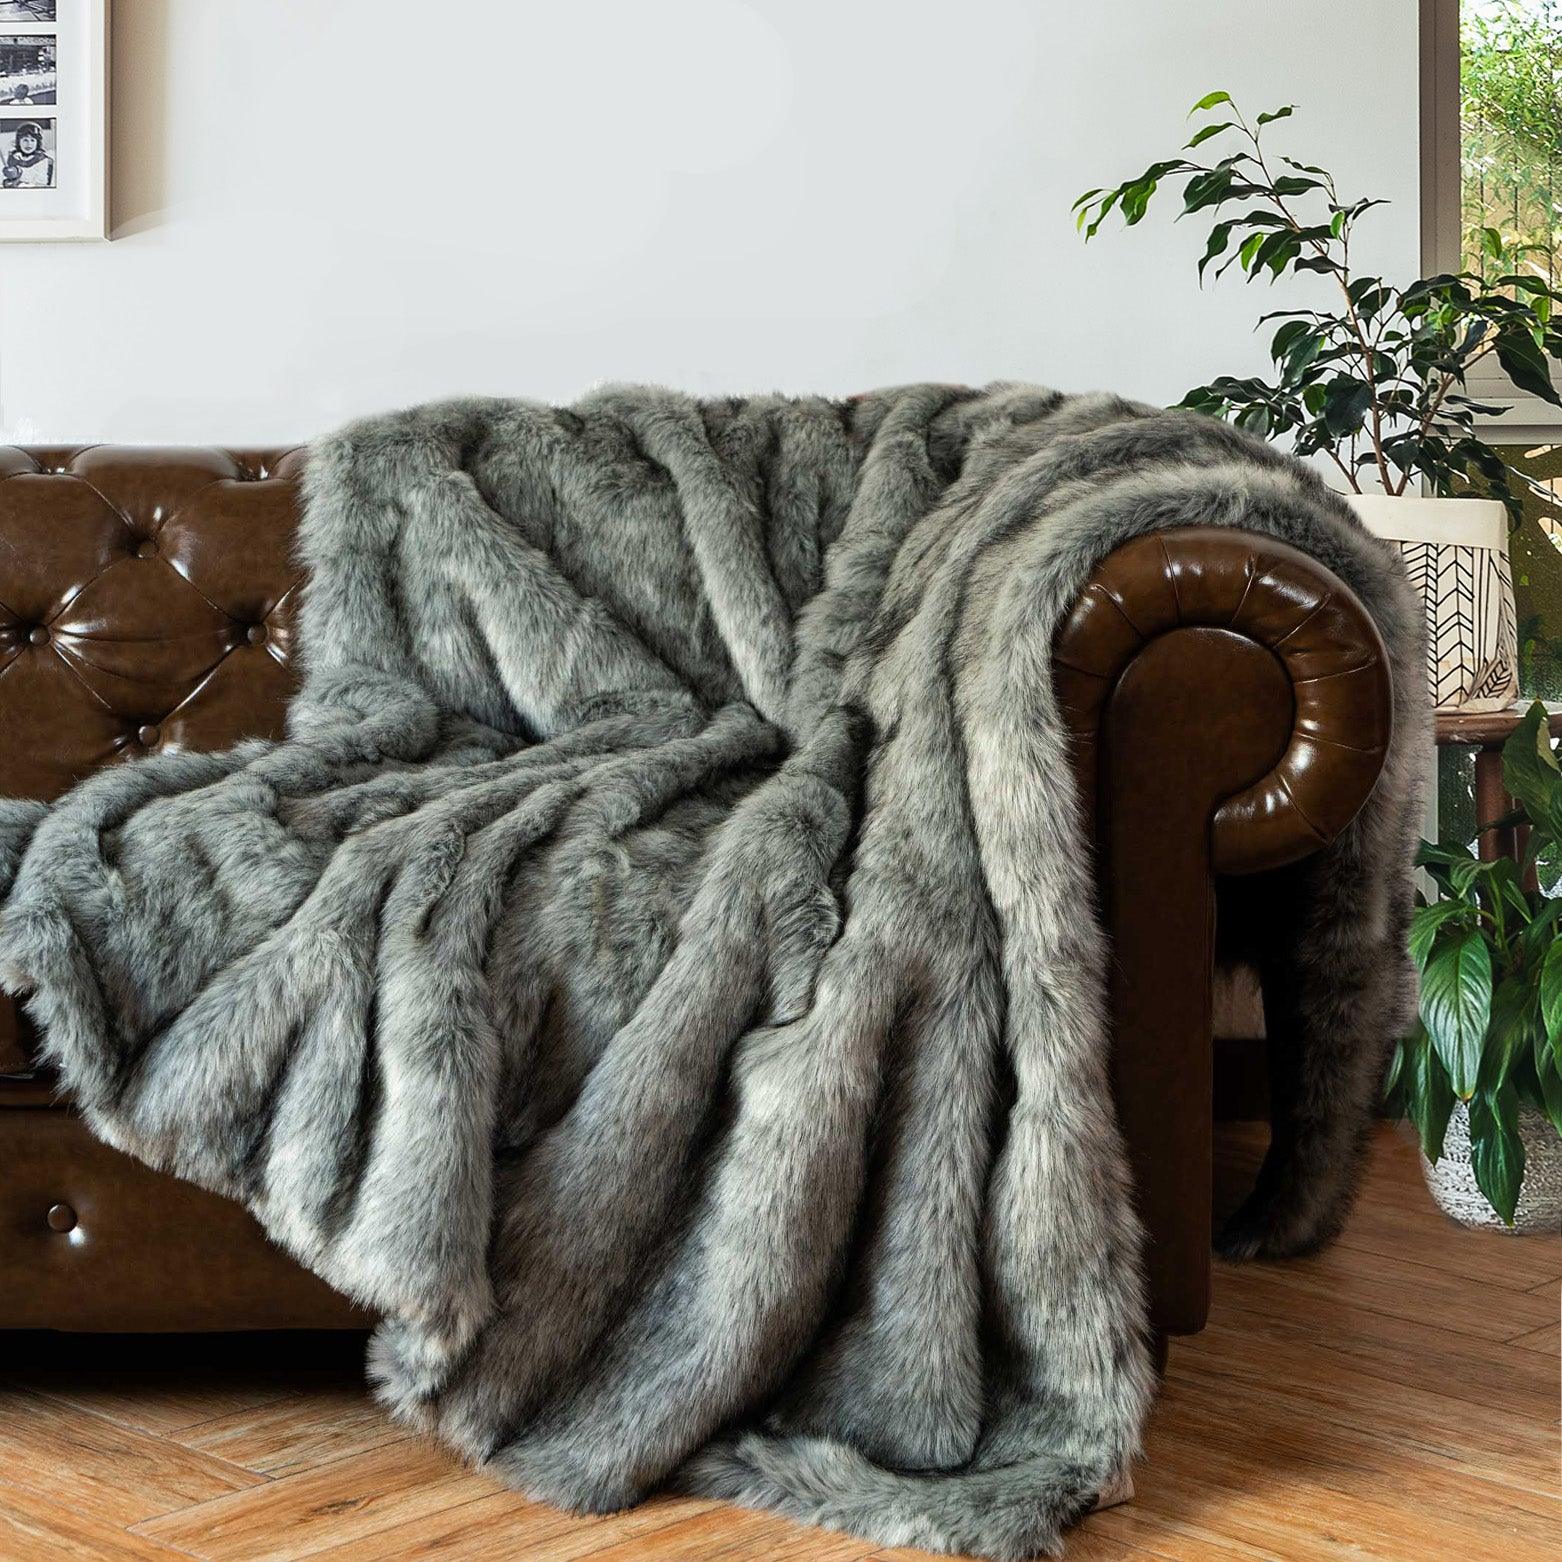 BATTILO HOME Grey Faux Fur Throw Blanket for Couch,Bed, Fake Fur Blankets  Cozy Fuzzy Fluffy Elegant Furry Blanket Decorative Couch Blanket Reversible